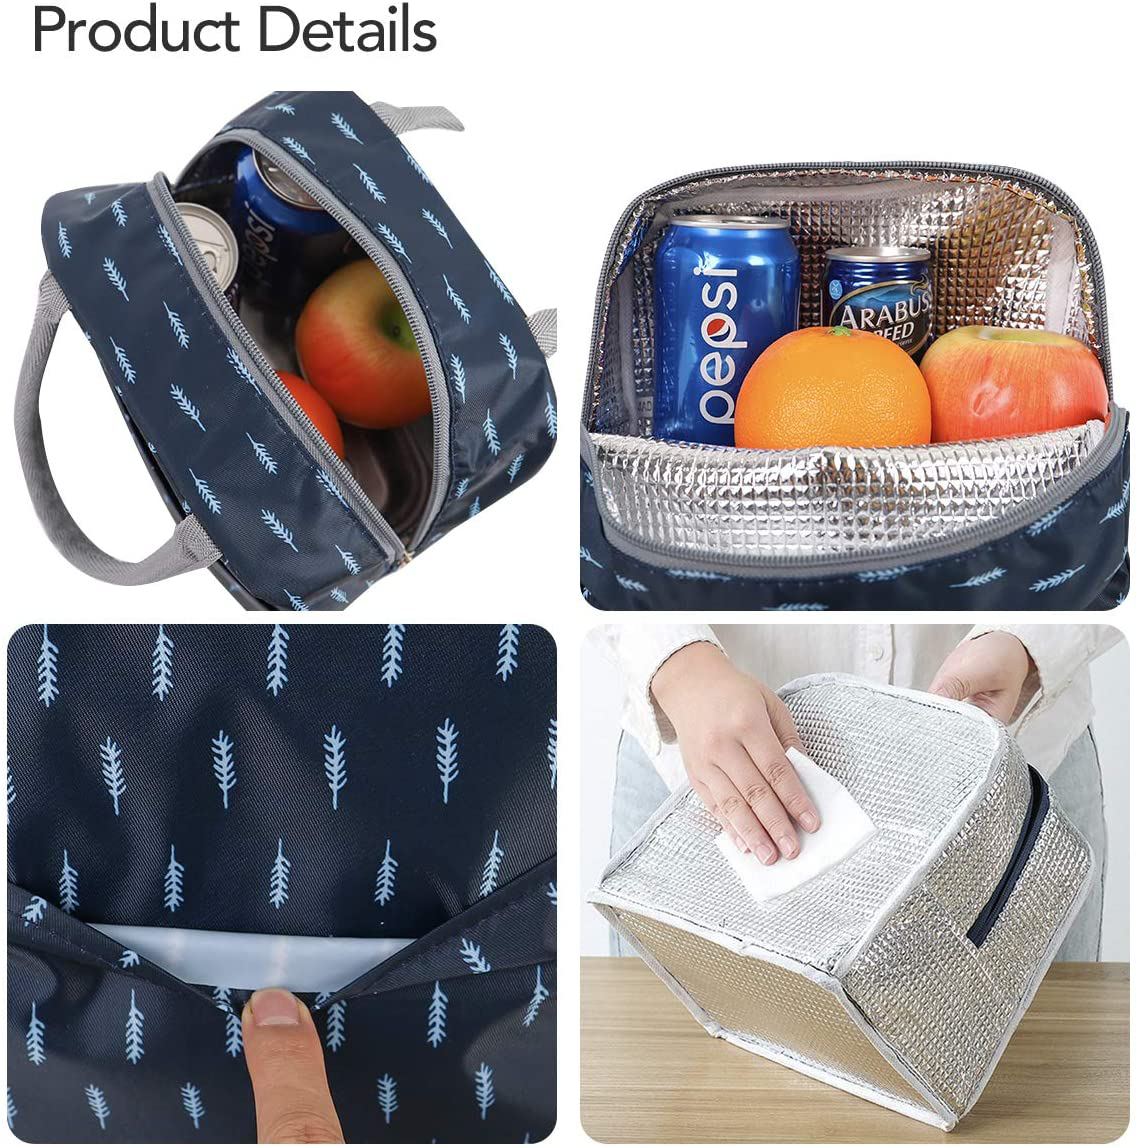 Buringer Reusable Insulated Lunch Bag Cooler Tote Box with Front Pocket Zipper Closure for Woman Man Work Picnic or Travel(Hot Air Balloon with Shoulder)